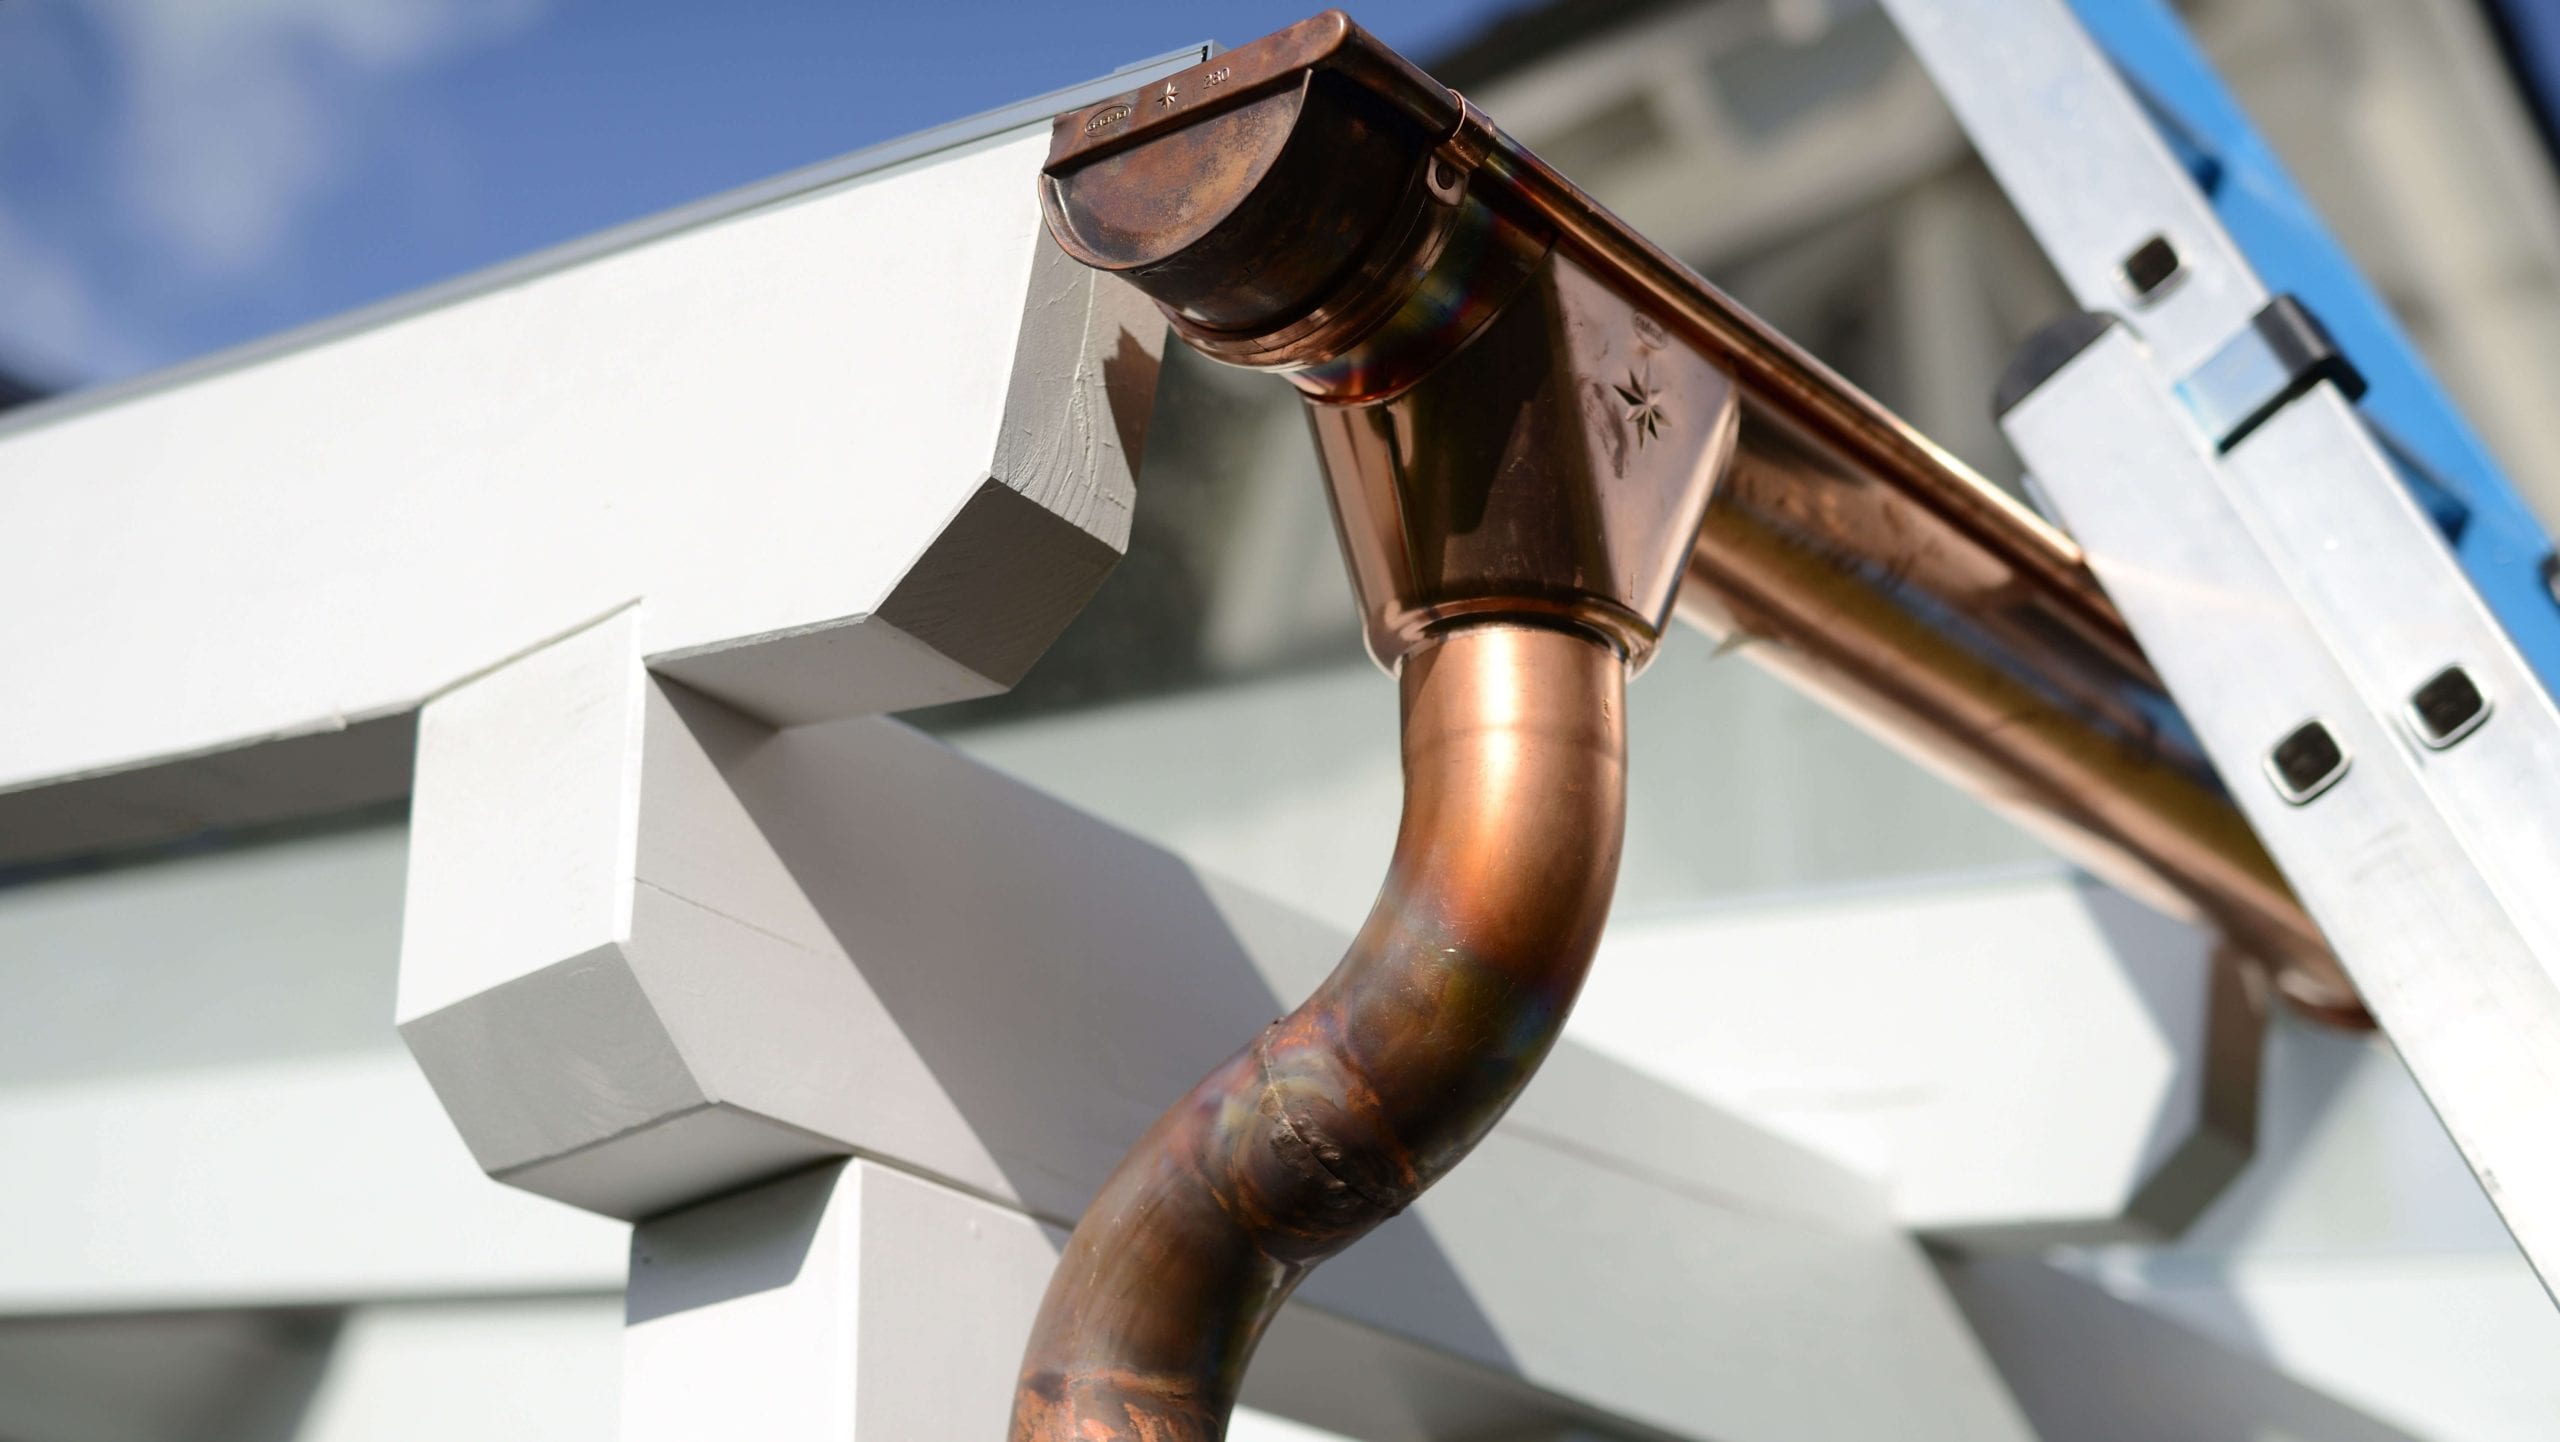 Make your property stand out with copper gutters. Contact for gutter installation in Lexington